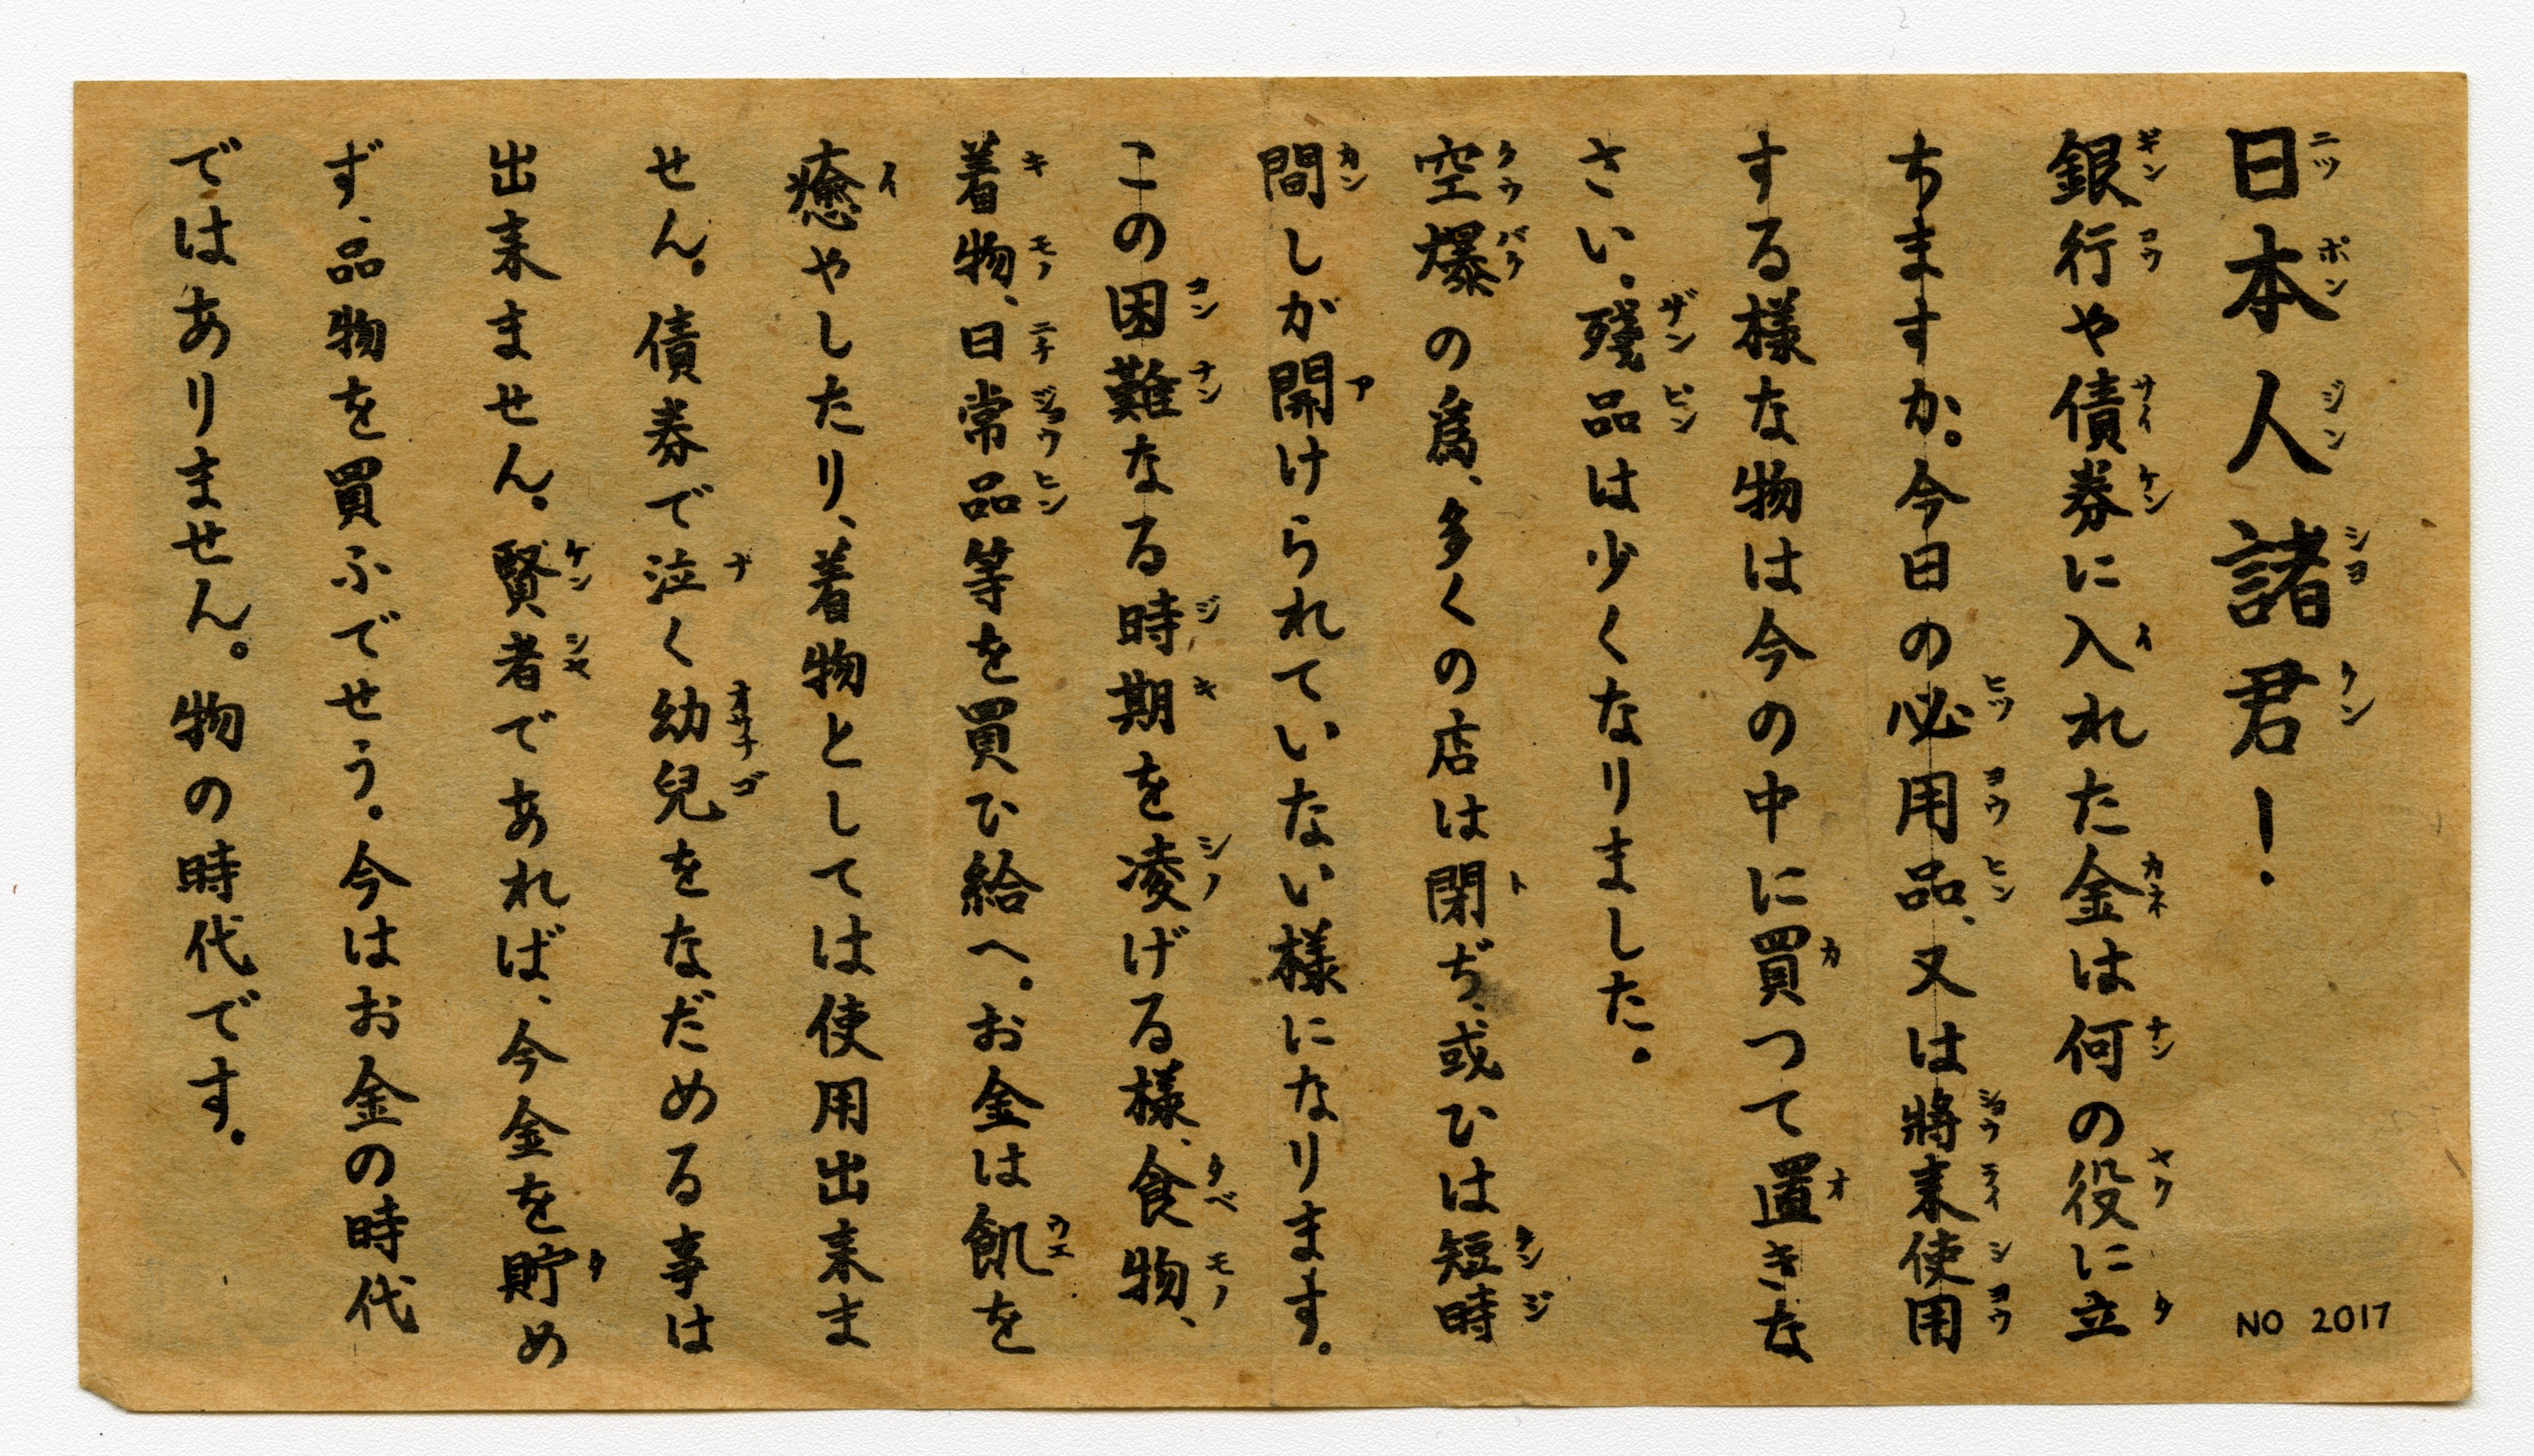 These leaflets, meant to warn Japanese civilians of impending firebombing and expose the weakness of the Japanese military to erode morale, were donated by Maurice Picheloup of the 39th bomb group. Picheloup took part in a night raid over Japan on August 14–15. Returning to base they received word of the end of the war. (Courtesy of The National WWII Museum, Gift of Maurice Picheloup, 2002.252.006.)